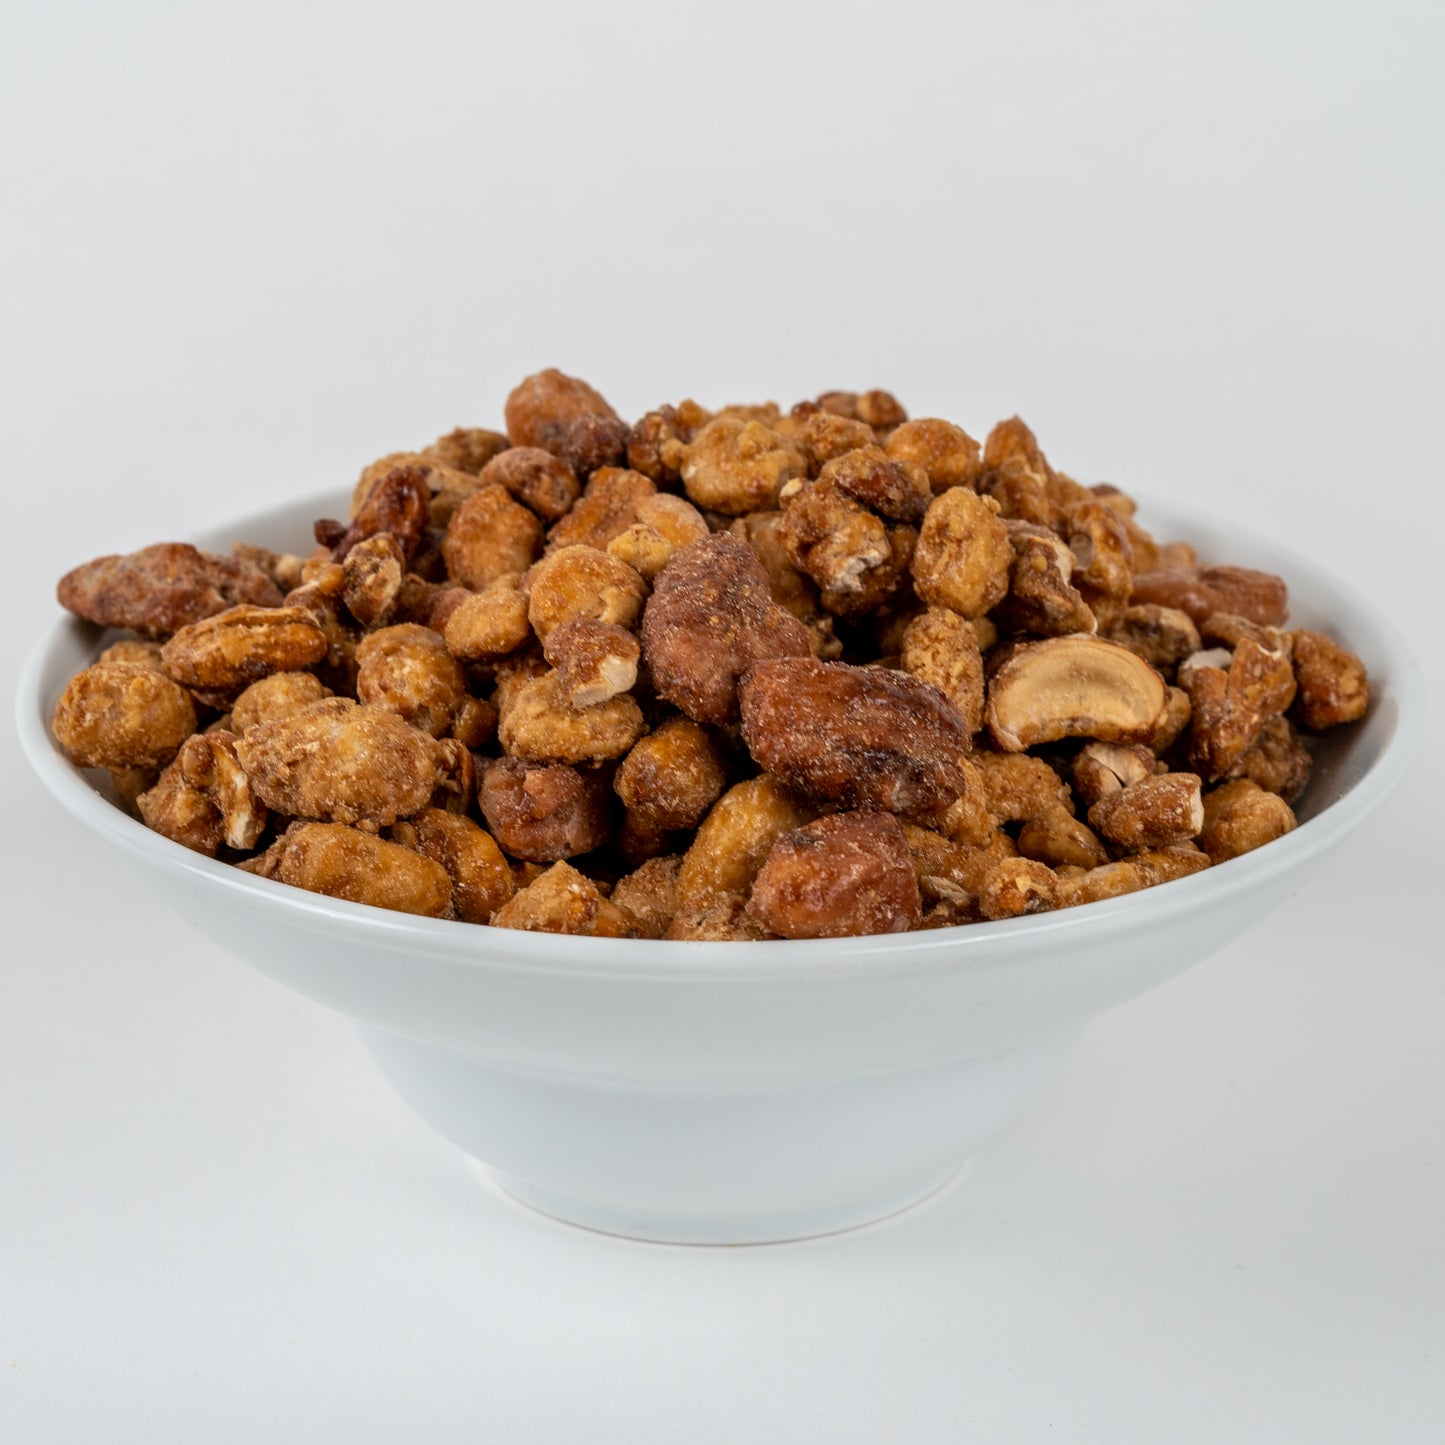 Butter Toffee Mixed Nuts